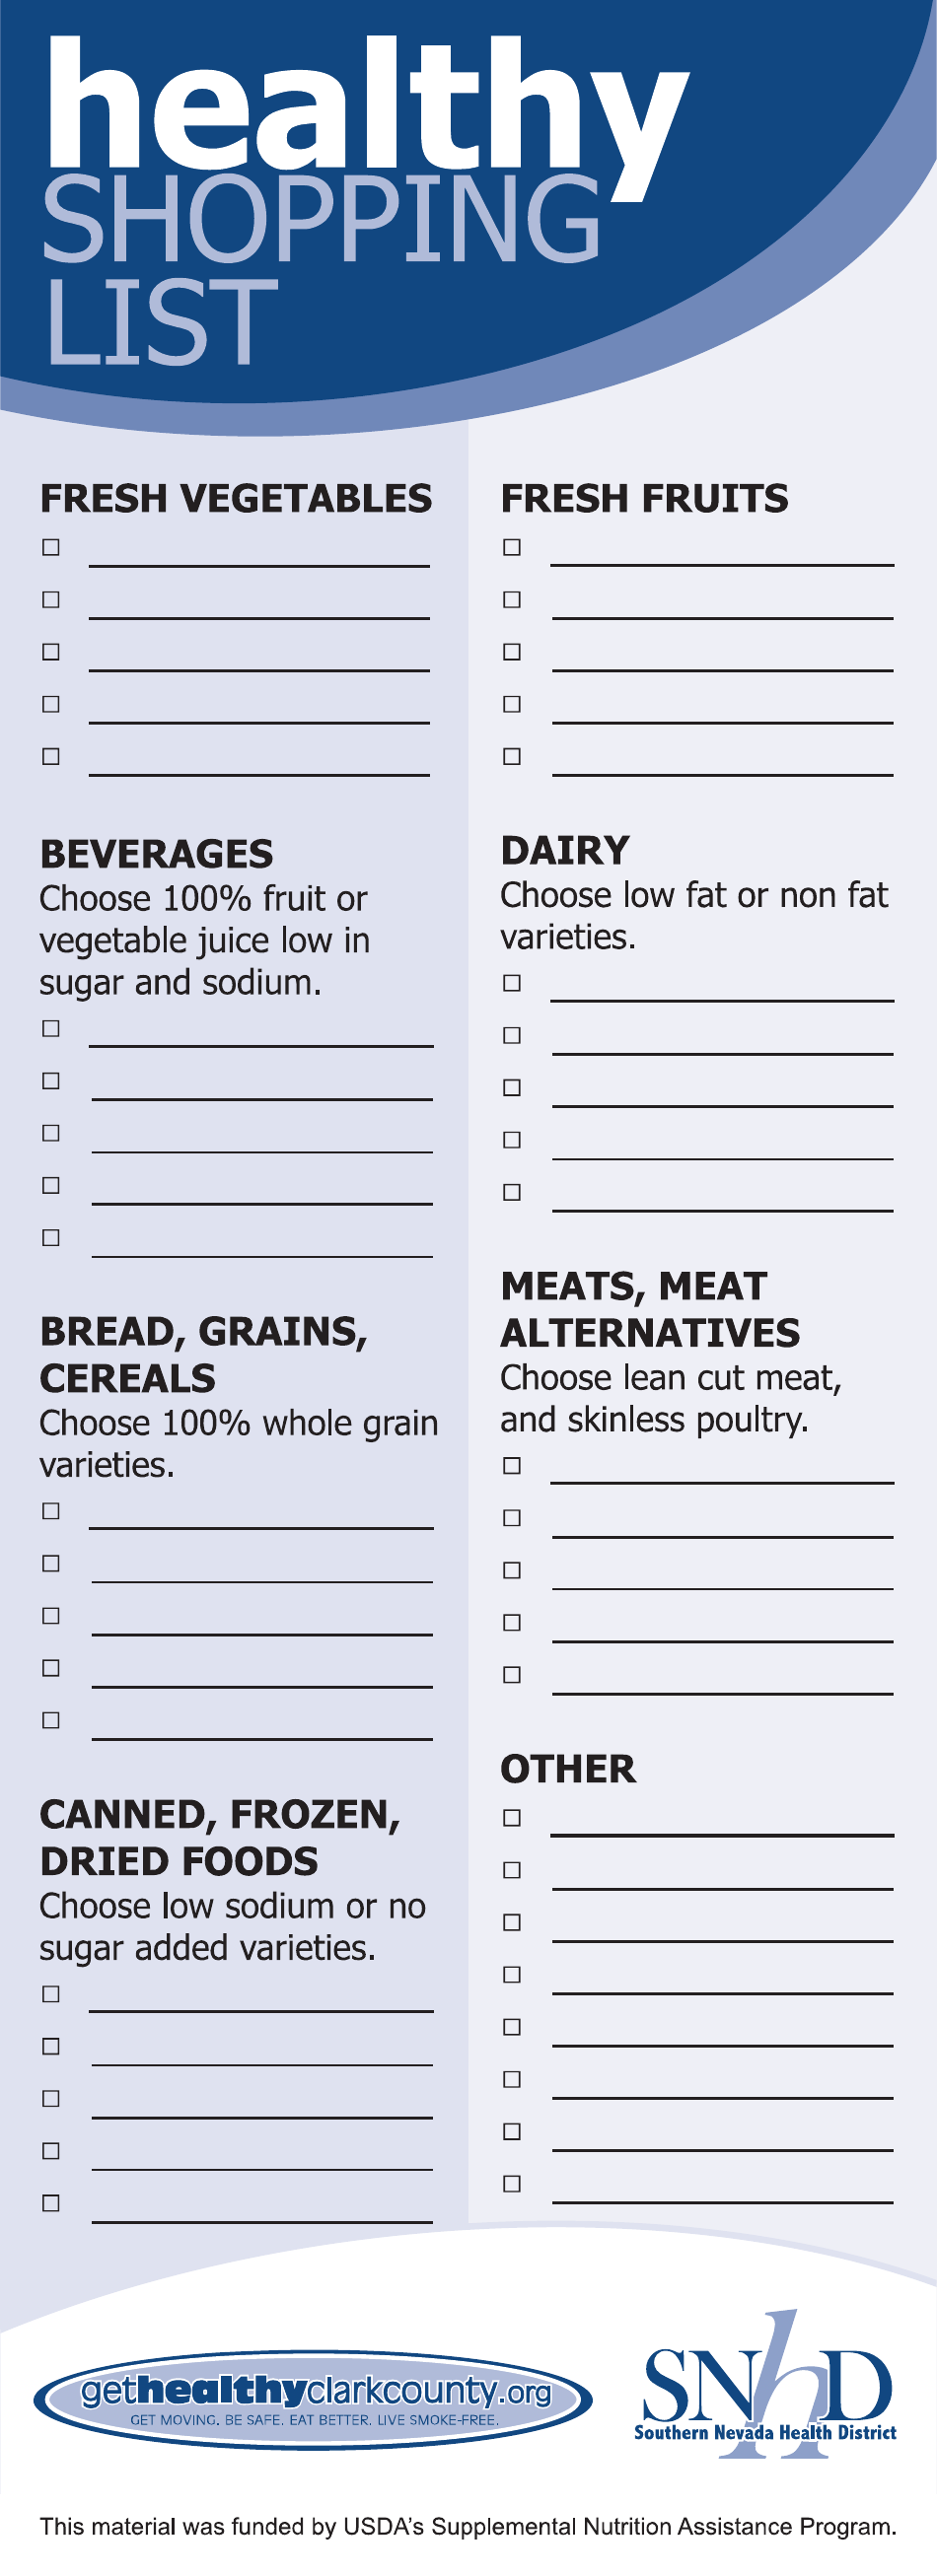 Healthy Shopping List Template Preview - Southern Nevada Health District